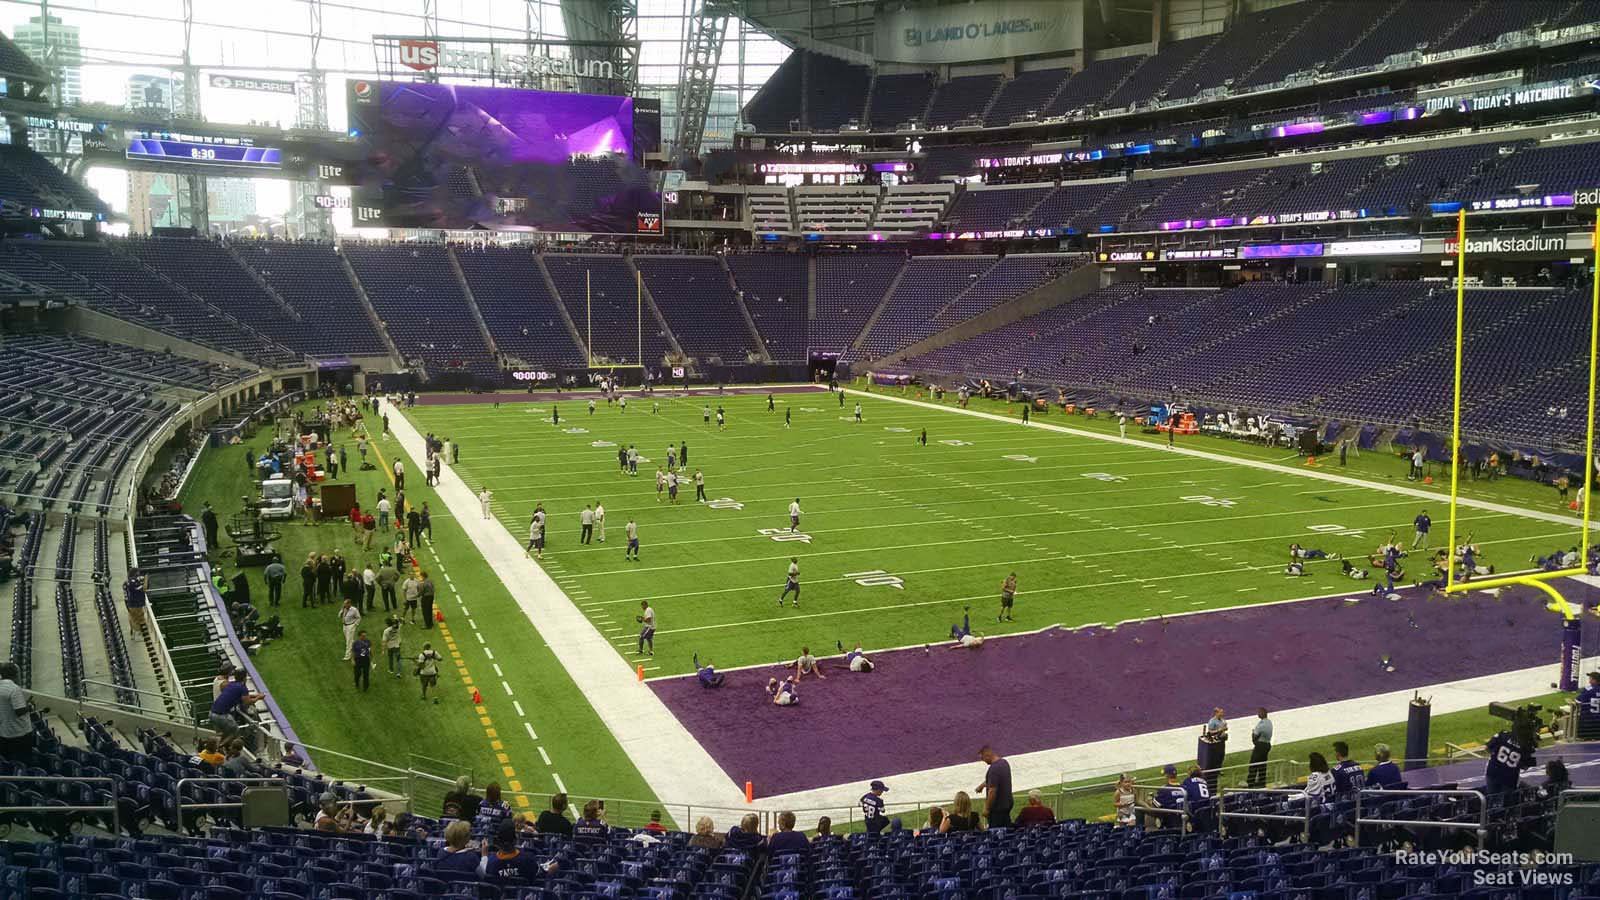 section 122, row 24 seat view  for football - u.s. bank stadium